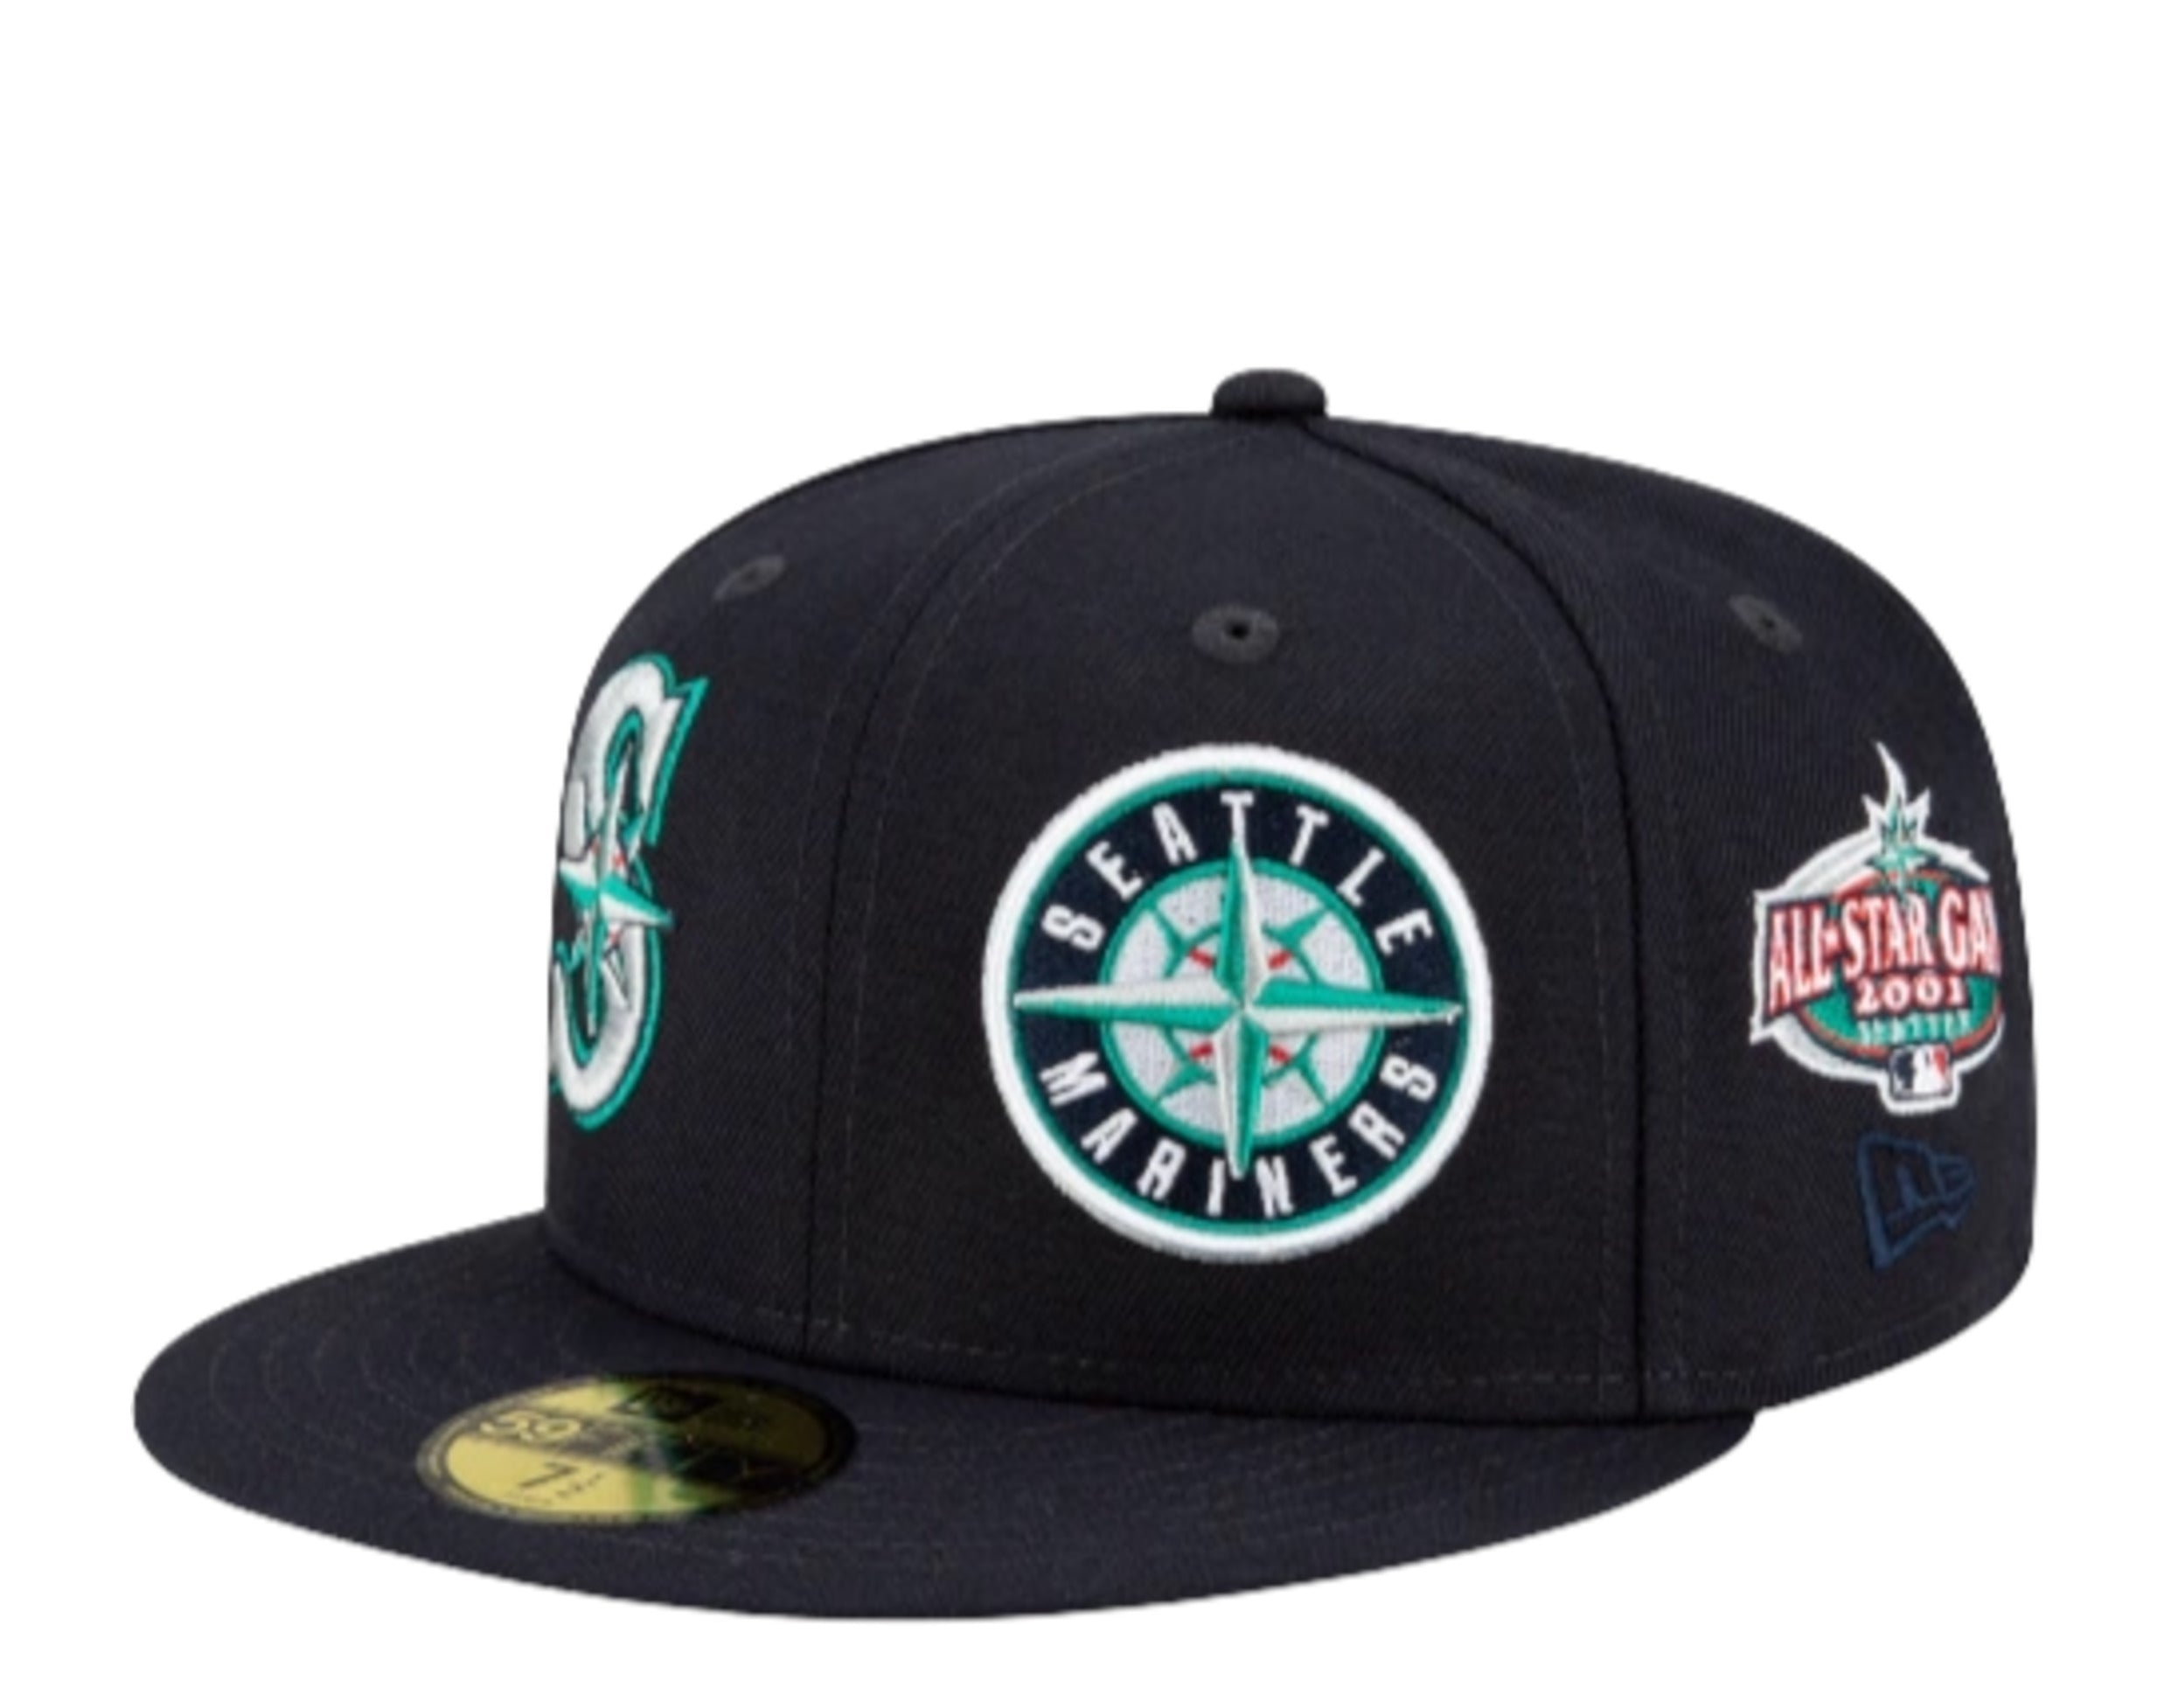 New Era x Hat Club Seattle Mariners 2001 All Star Game Patch